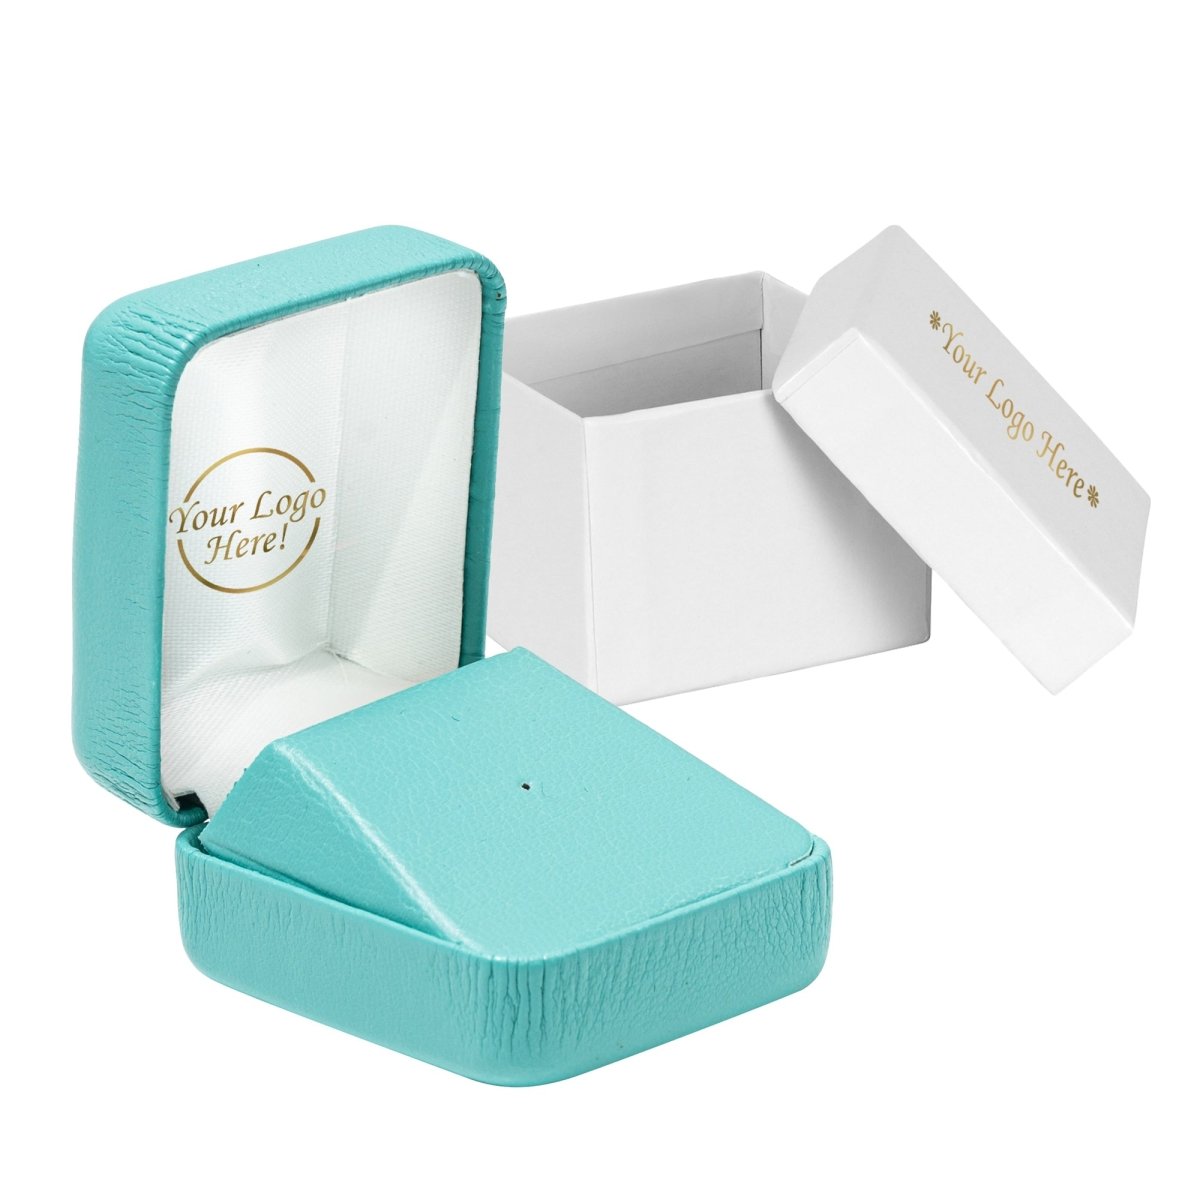 Vibrant Leatherette Tie Tack Box - Prestige and Fancy - Turquoise Leatherette